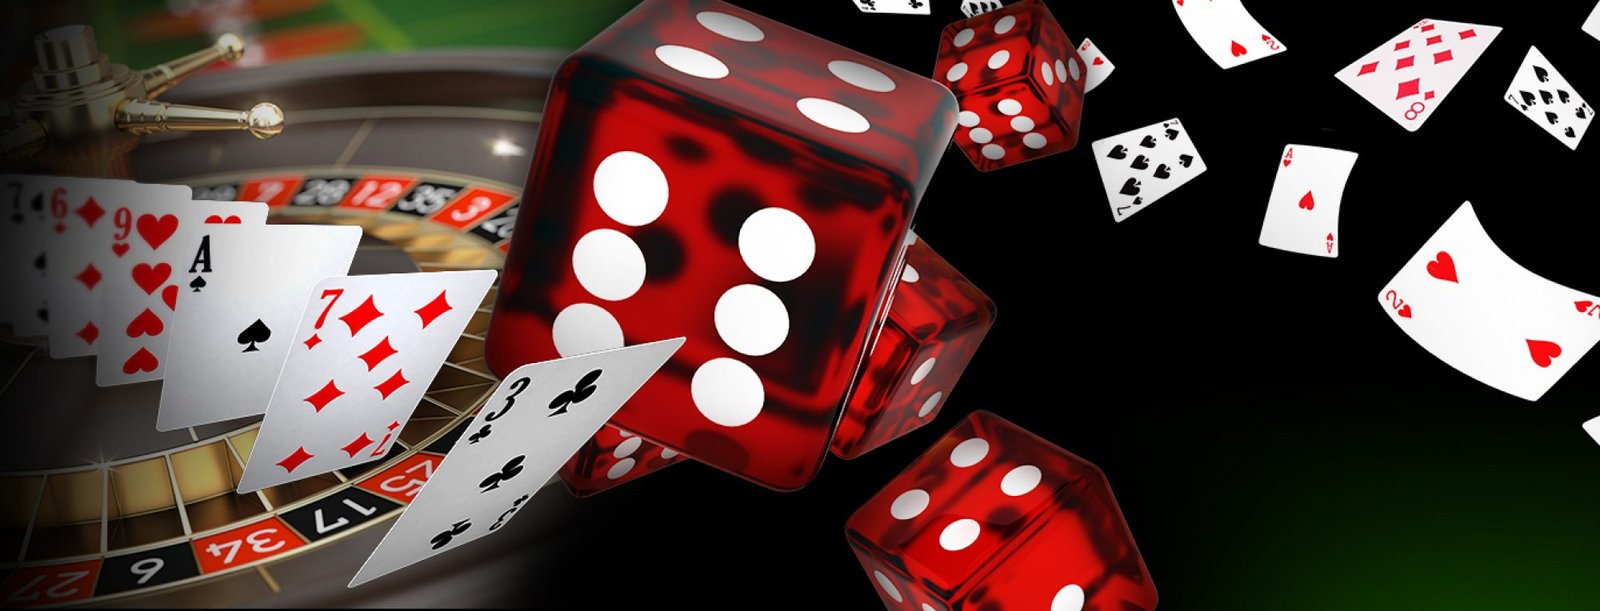 MomoGaming.com is a website with best casino games information